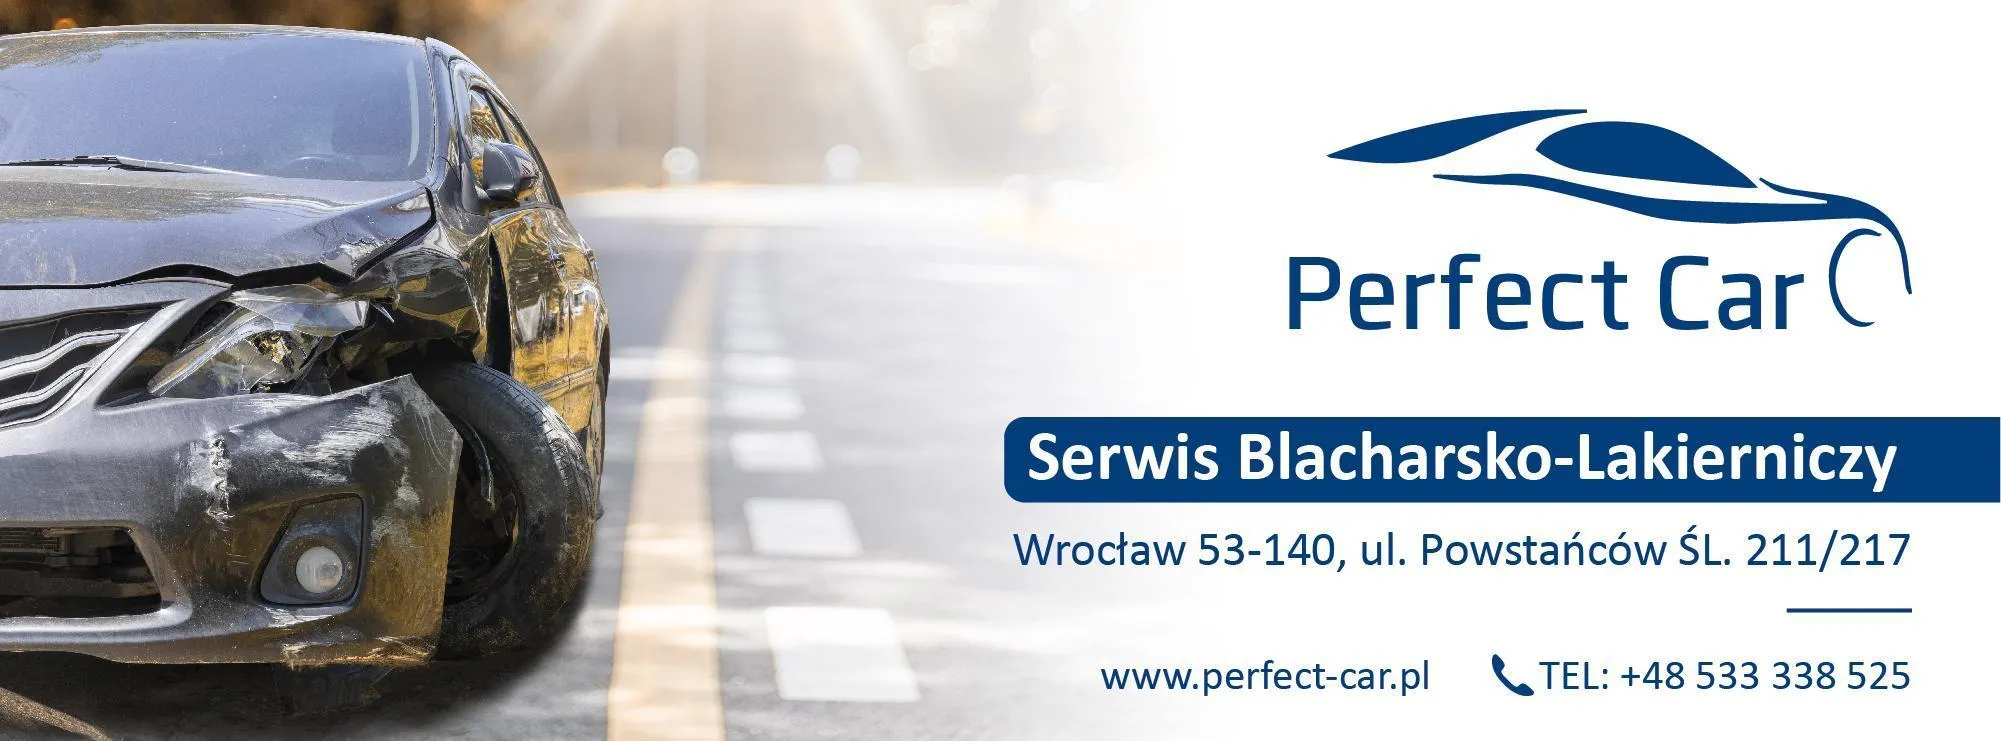 banner reklamowy Perfect Care blacharstwo